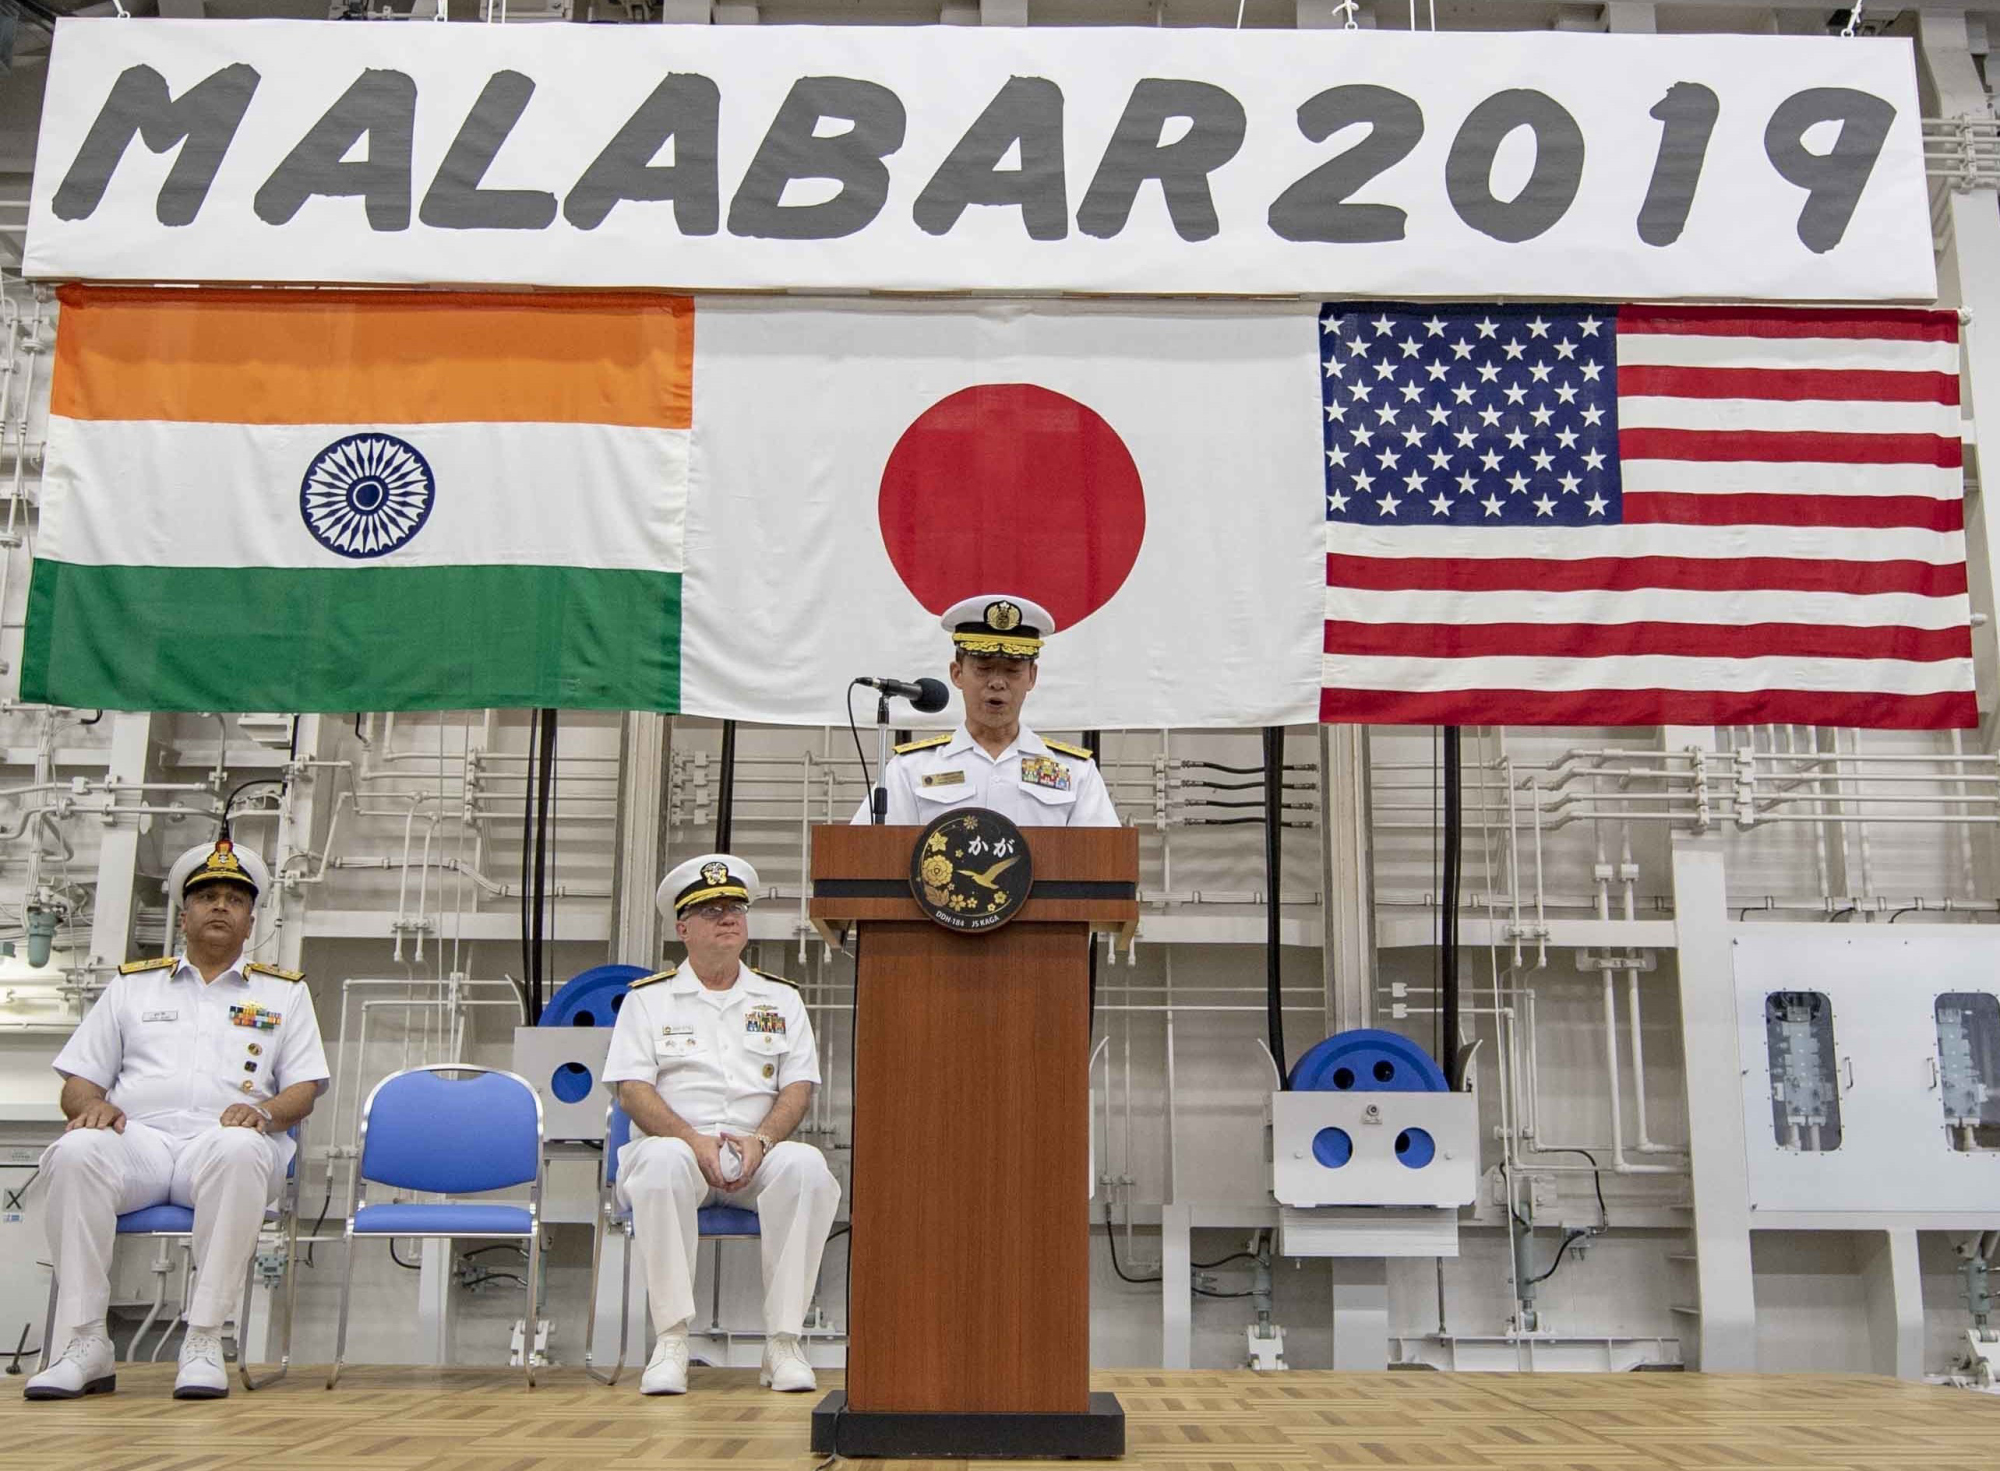 Maritime Self-Defense Force Rear Adm. Masafumi Nishiwaki speaks Sept. 26 at the opening of the Malabar military exercise. 2019 was a banner year for Japan's security relations. | COMMANDER, SUBMARINE GROUP SEVEN